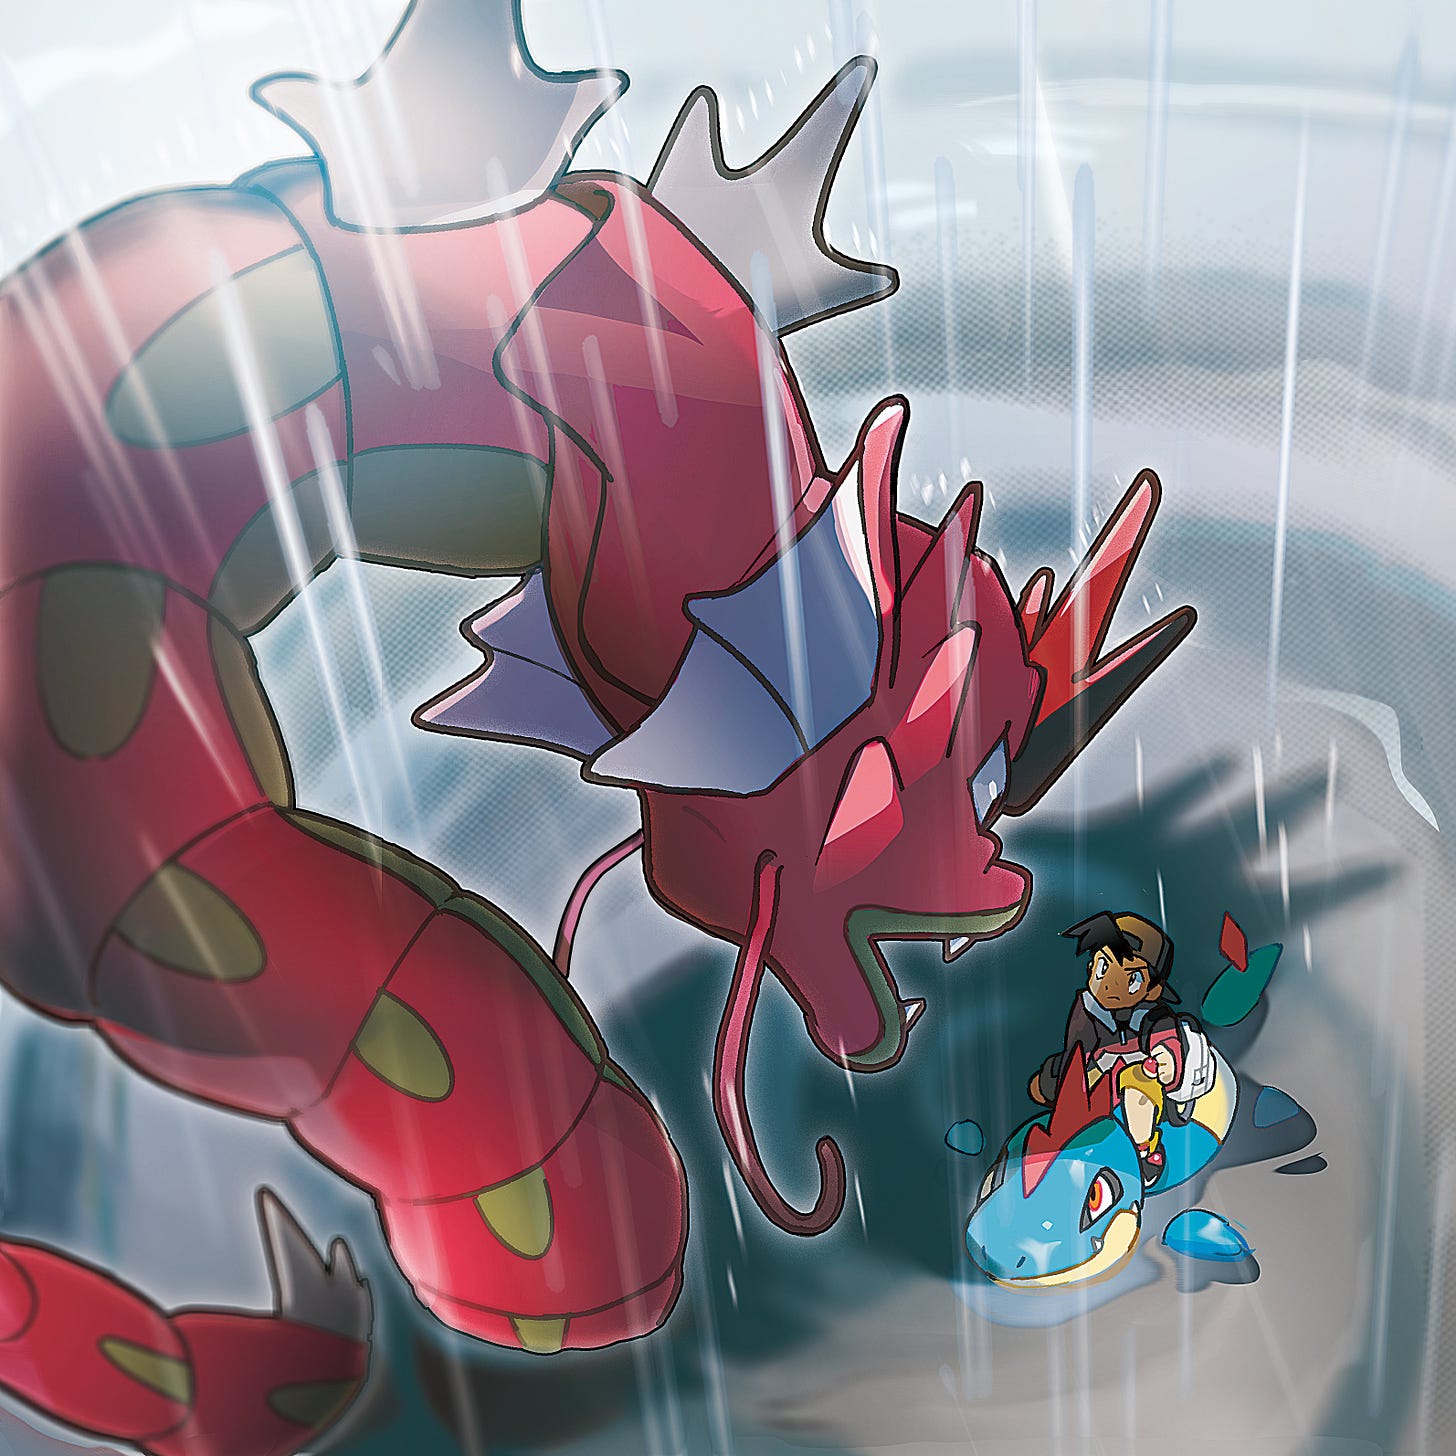 A commemorative illustration from February 2022, depicting the Red Gyarados at the Lake of Rage from Pokémon Gold and Silver